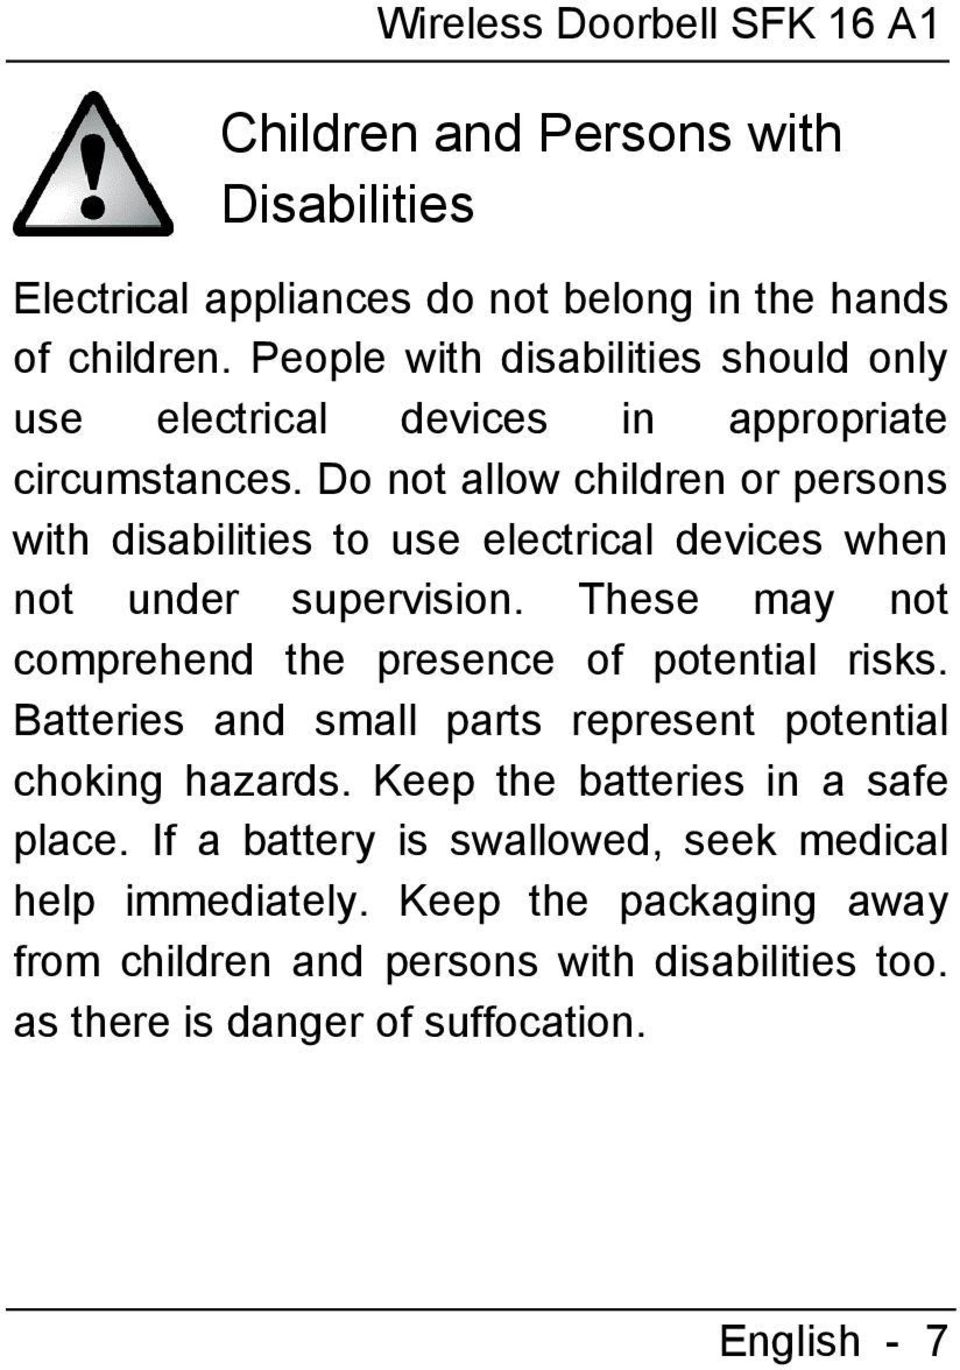 Do not allow children or persons with disabilities to use electrical devices when not under supervision. These may not comprehend the presence of potential risks.